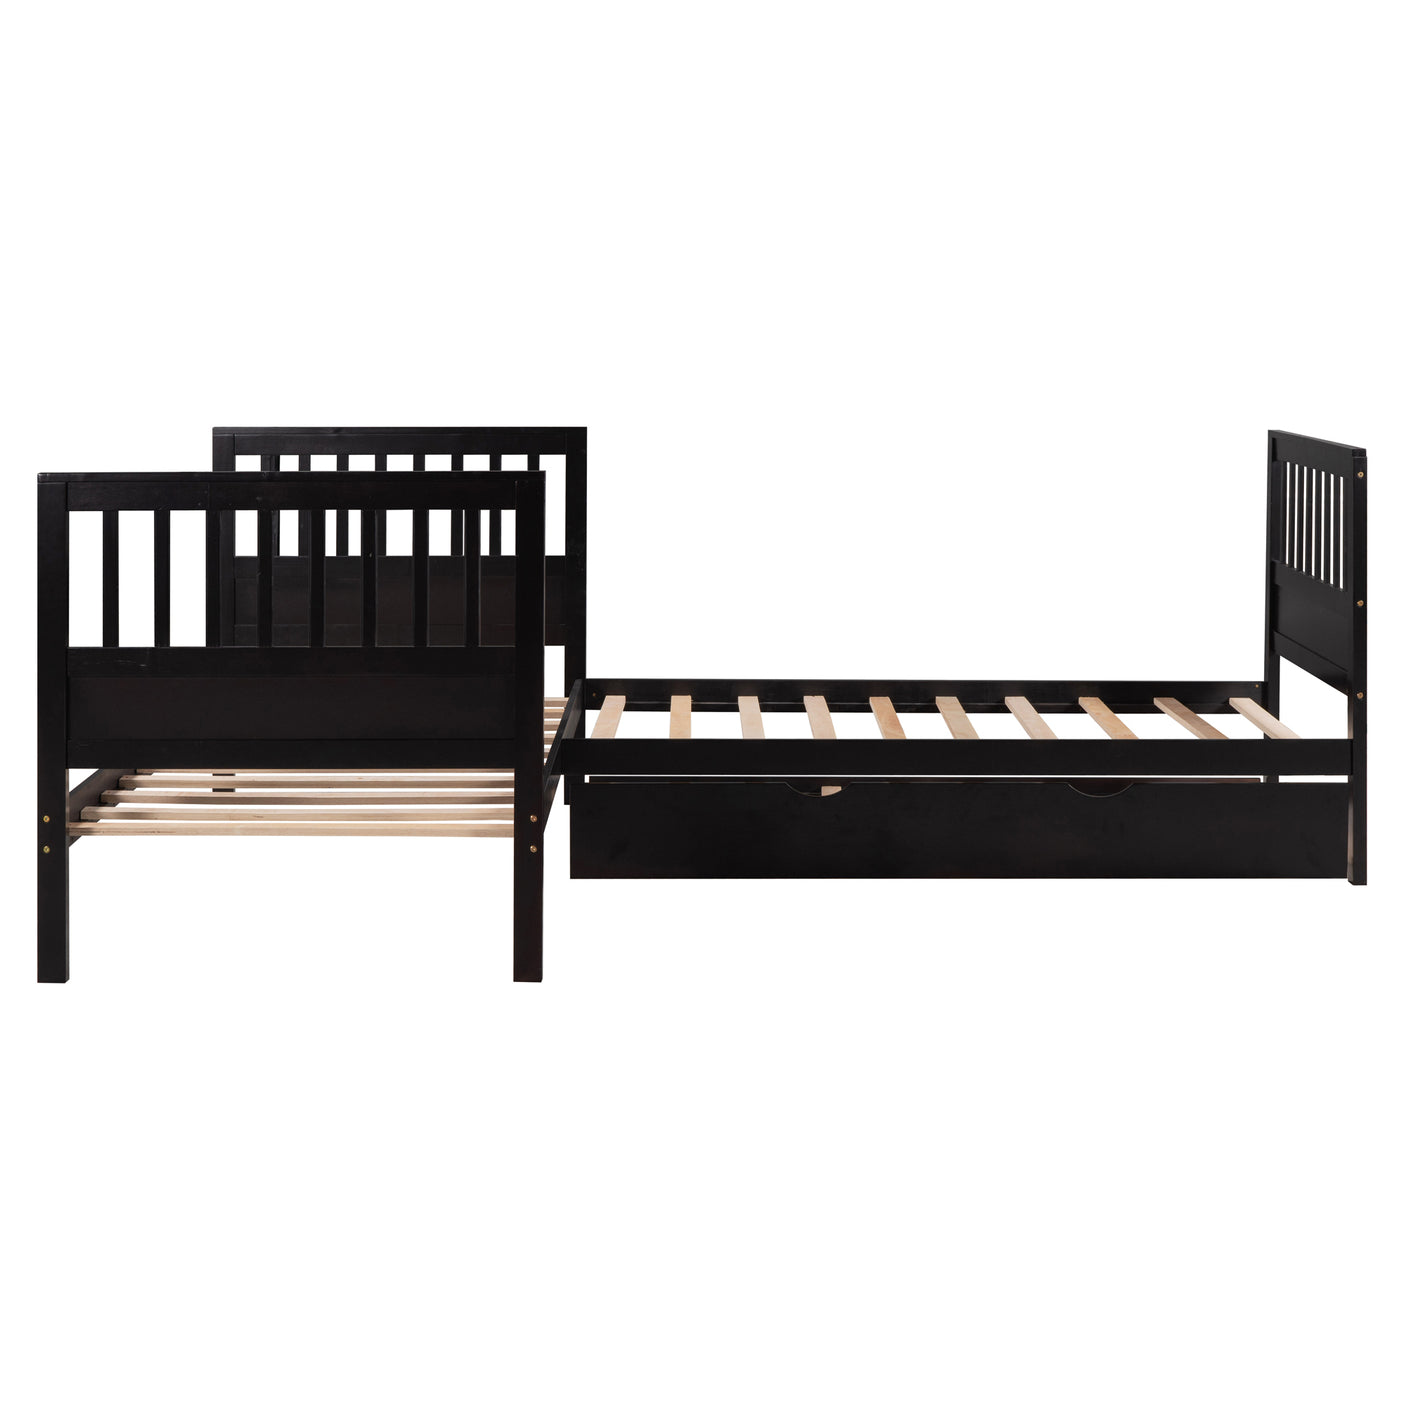 Twin Size L-Shaped Platform Bed with Trundle,Espresso - Home Elegance USA